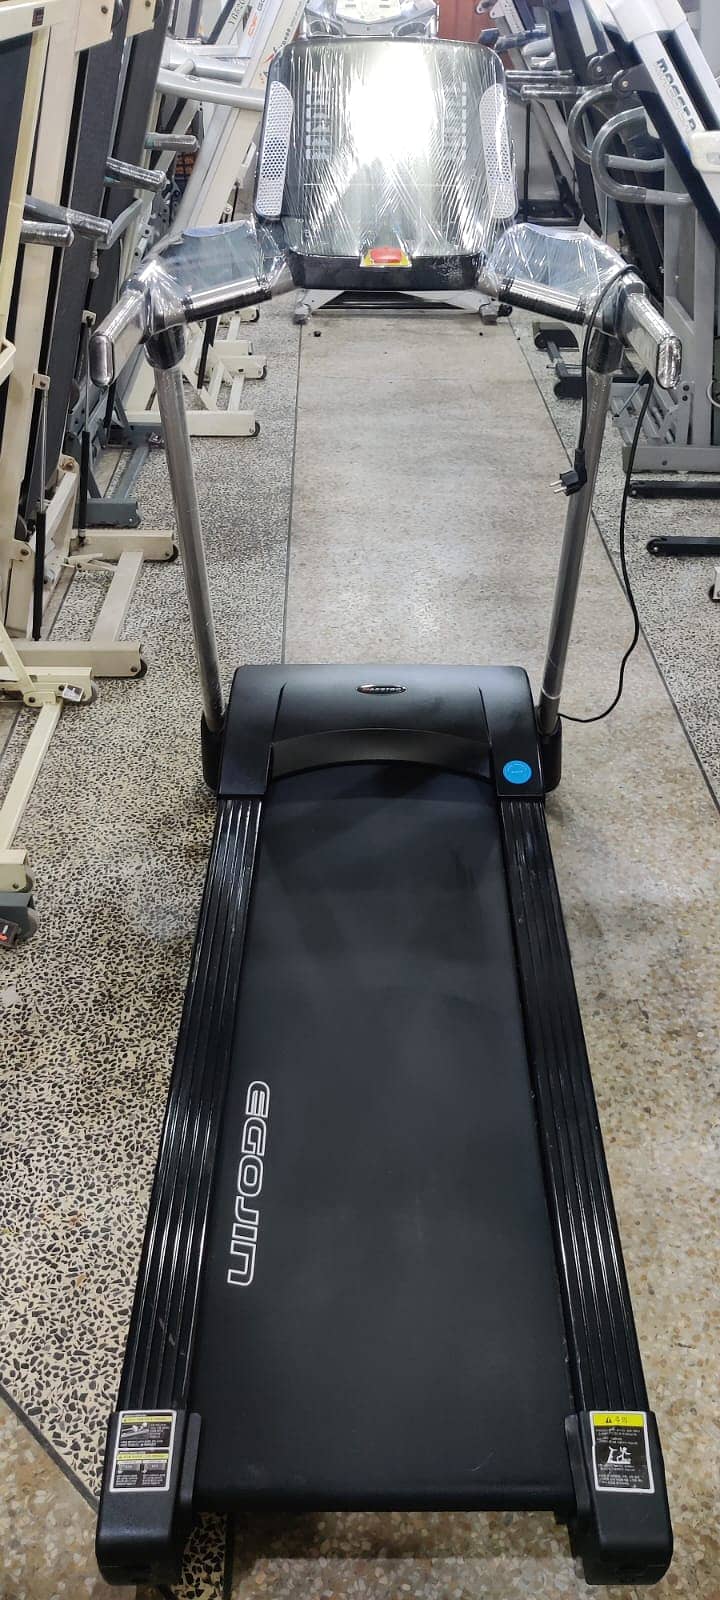 Treadmill Cycle Elliptical Running Machine Cardio Home & Commercial KW 2